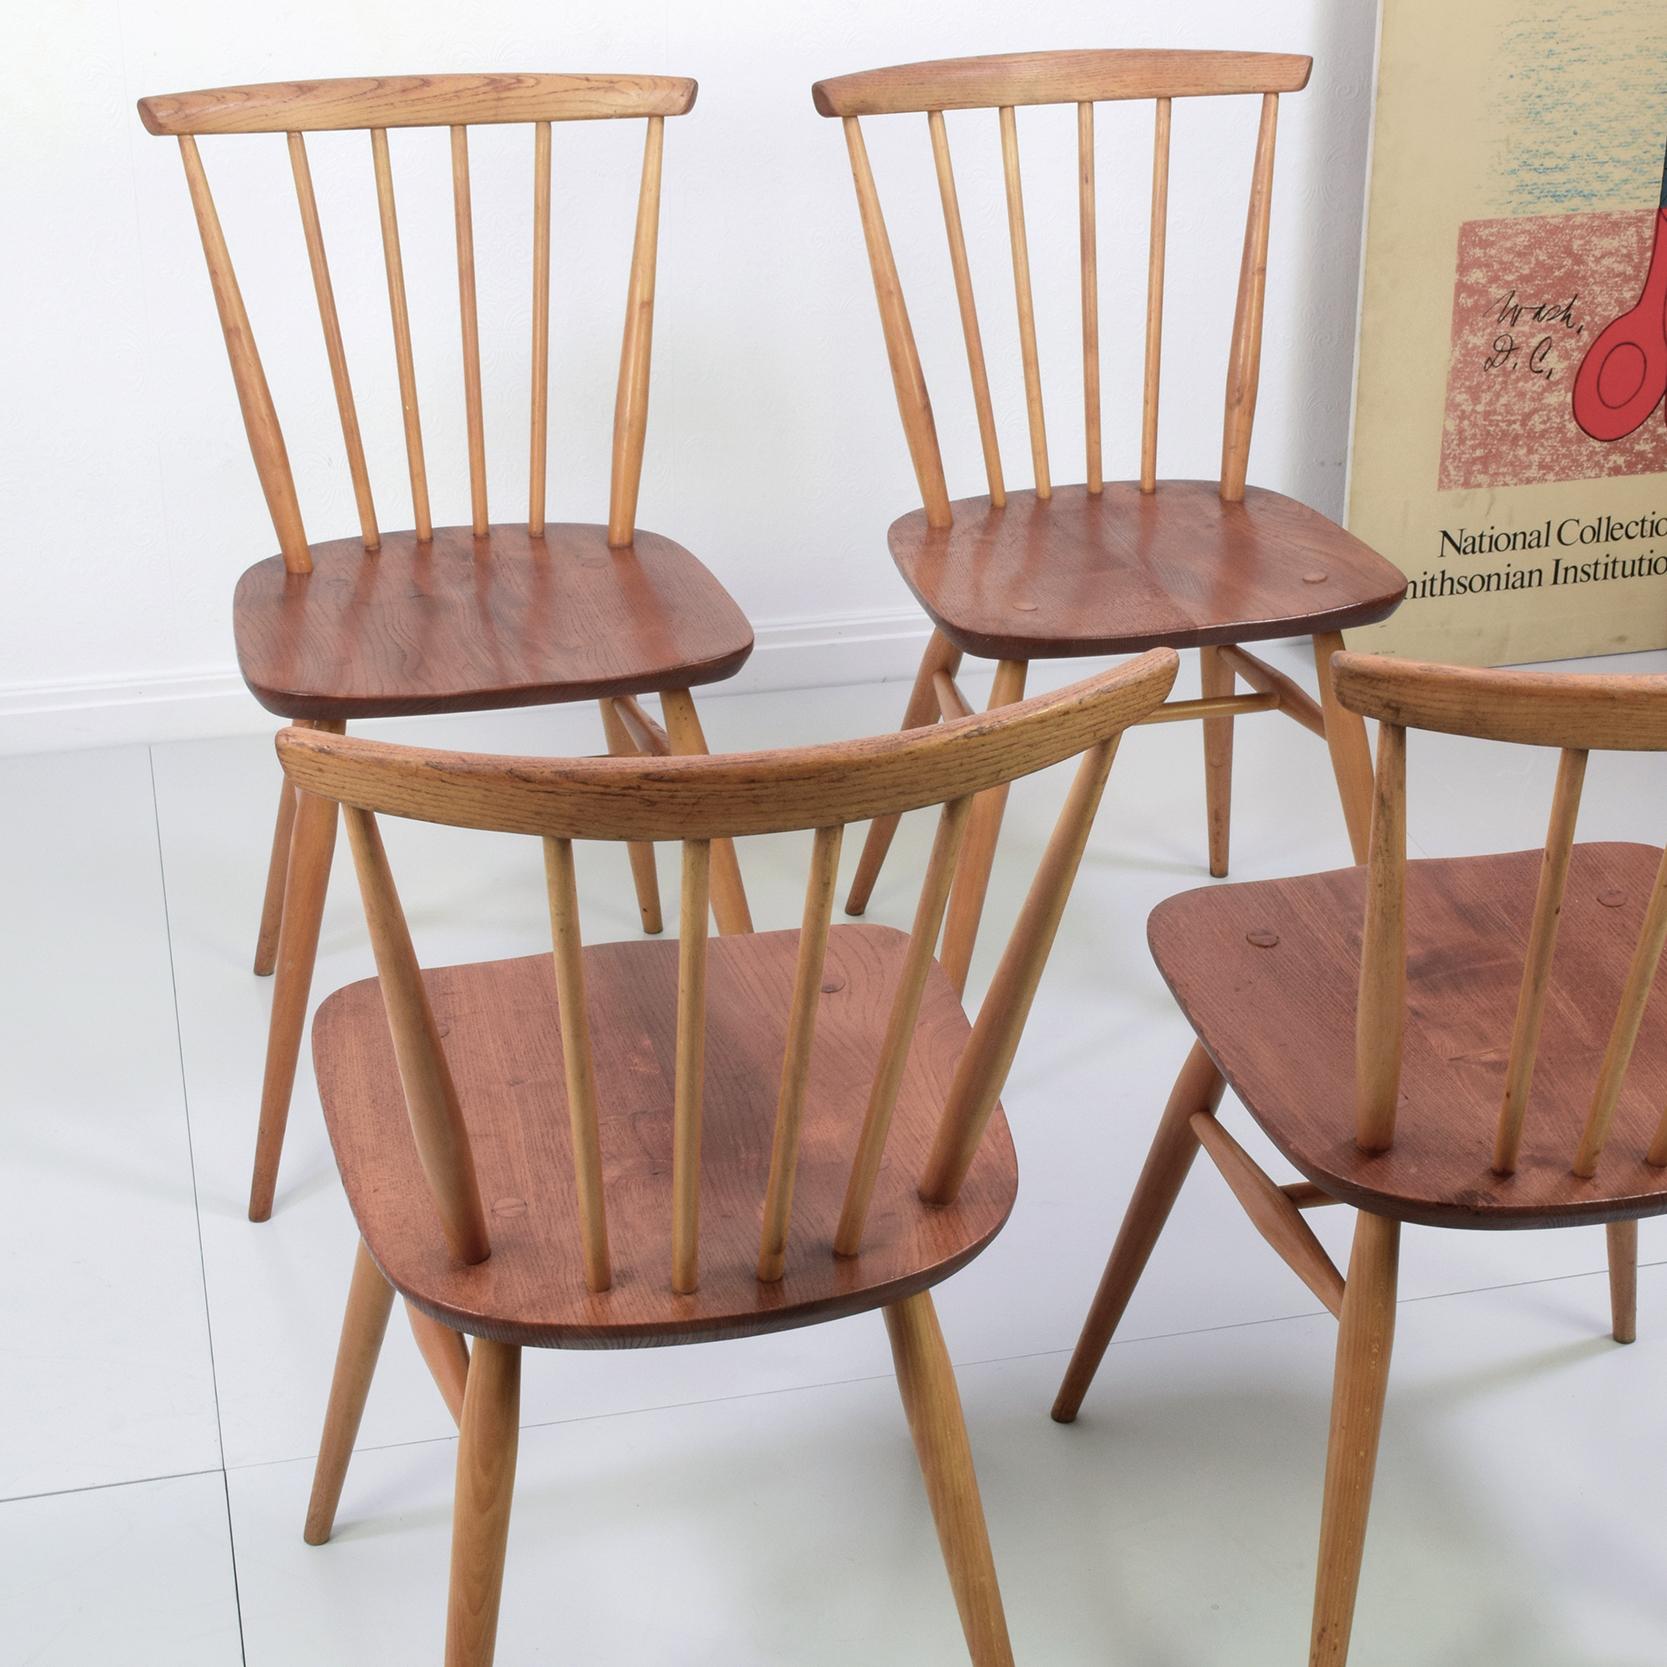 British Ercol Model 737 'Chiltern' 'Swept-Back' Chairs, Set of Four